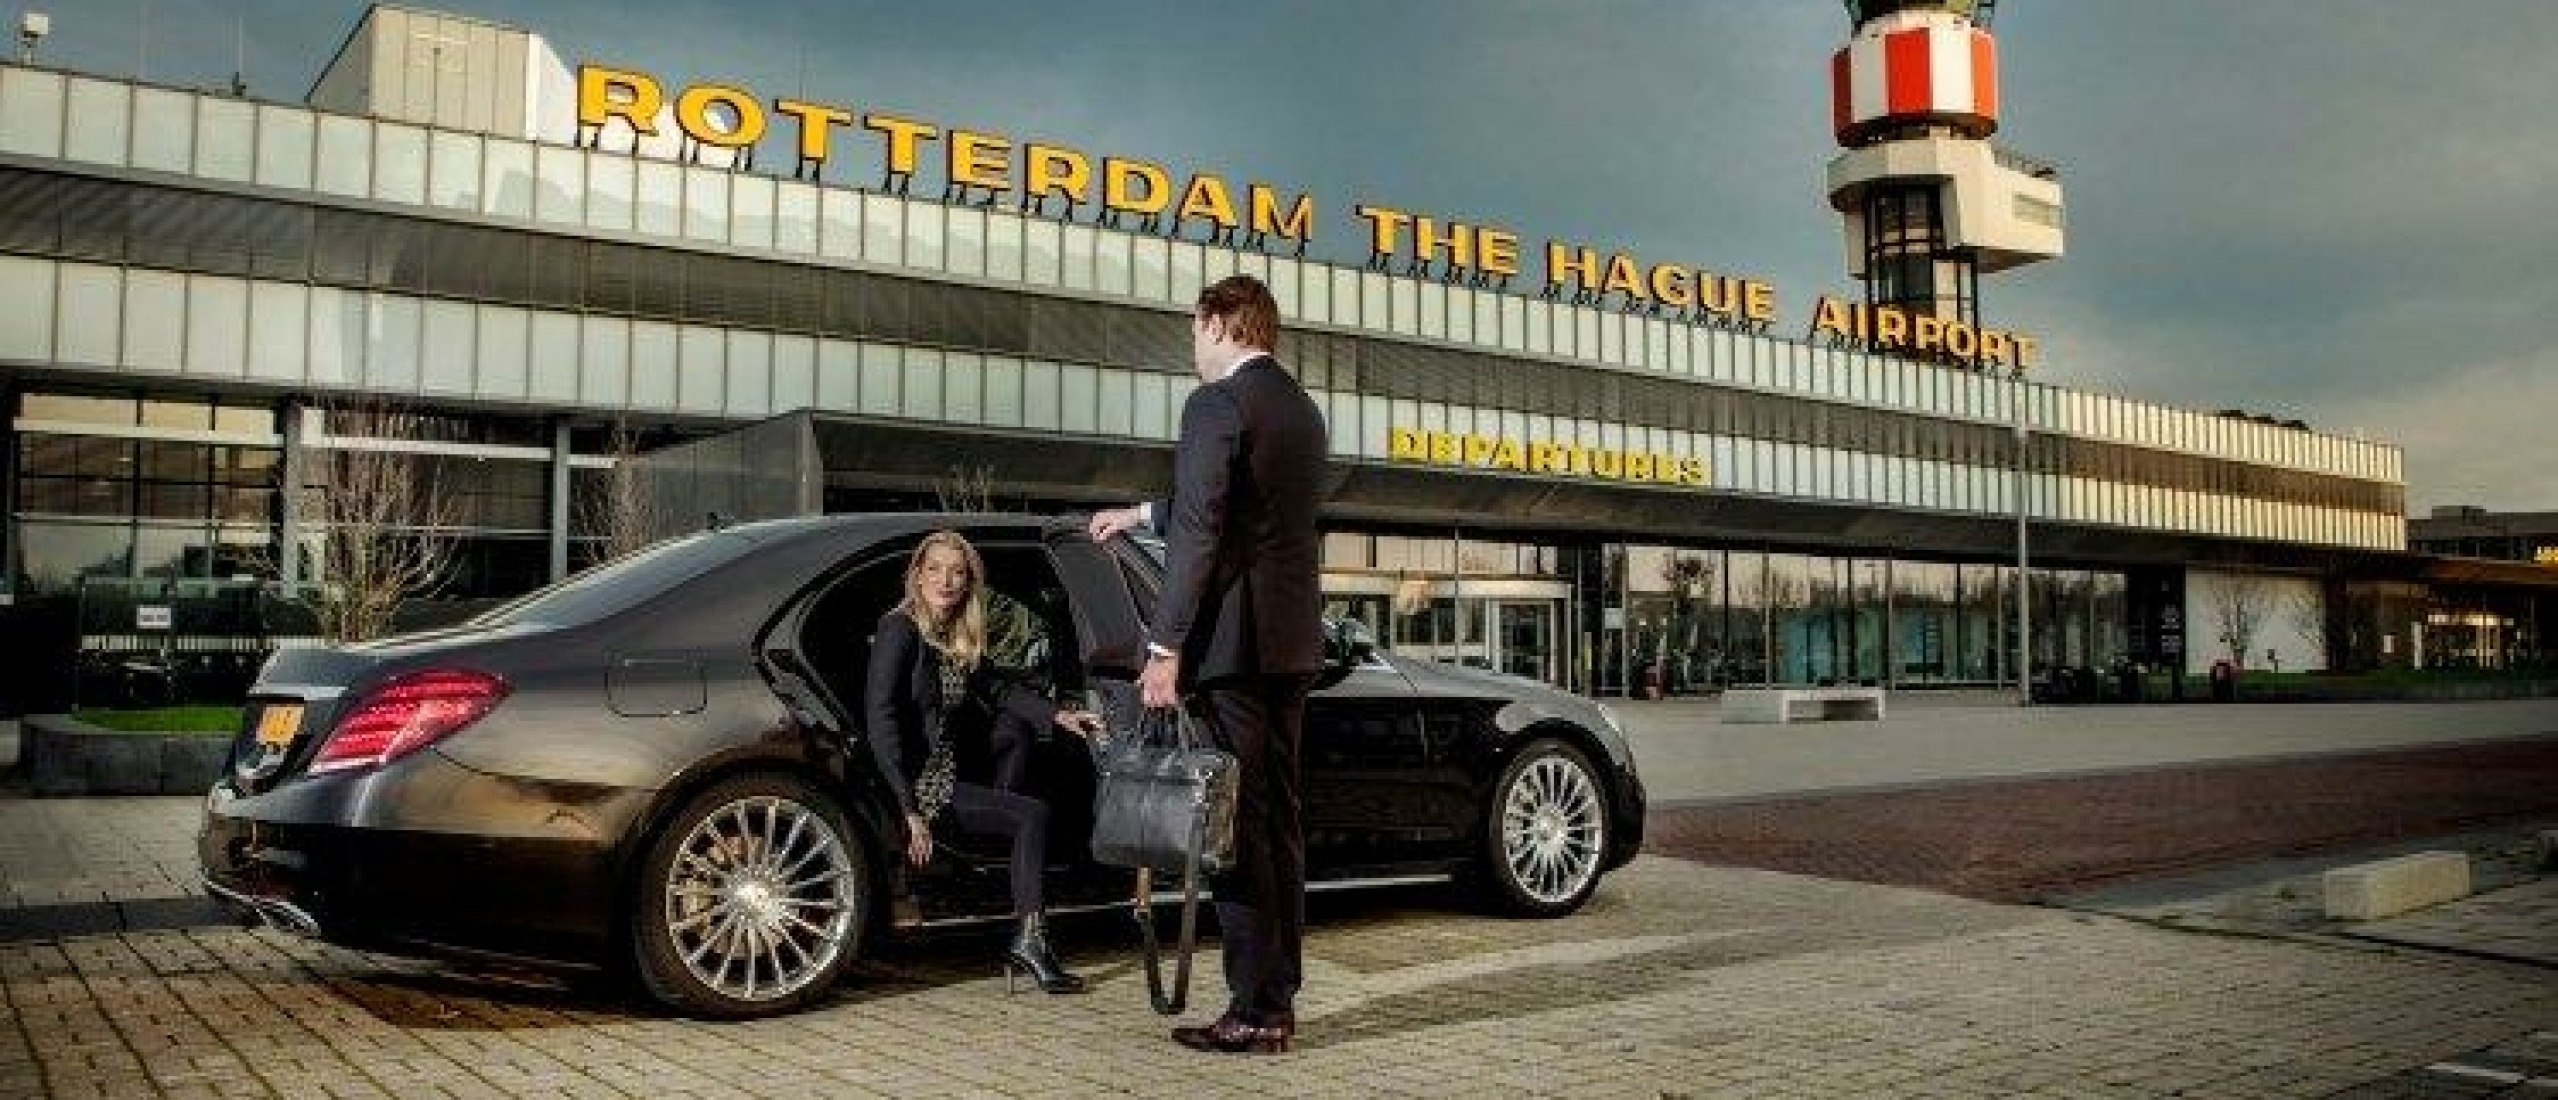 6 Reasons To Hire a Chauffeur For Your Special Event